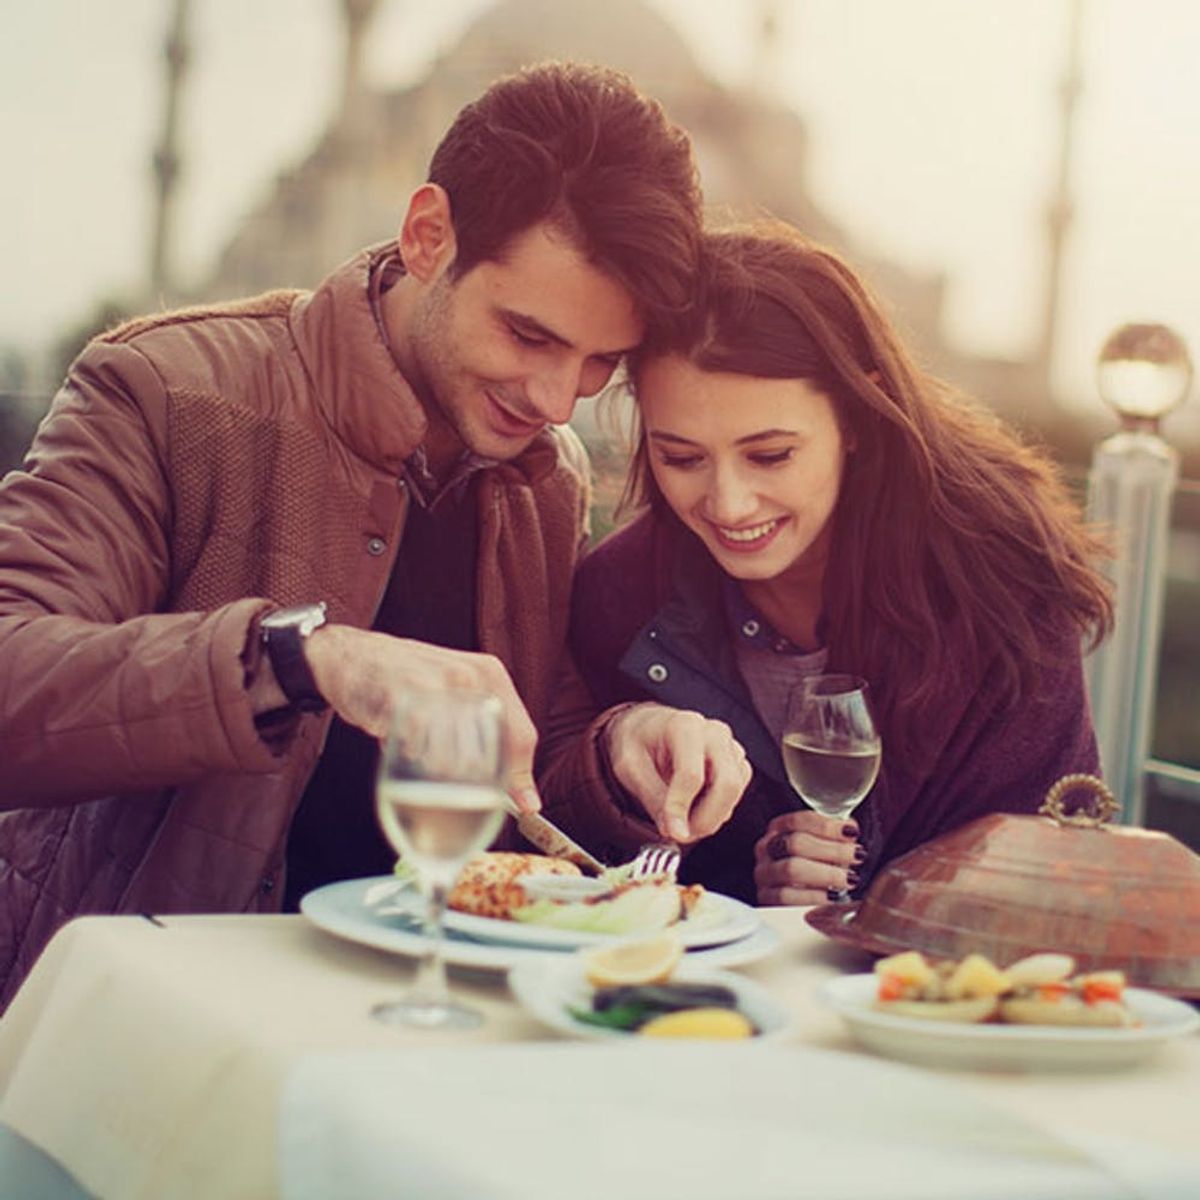 OpenTable Just Revealed the 100 Most Romantic Restaurants in America